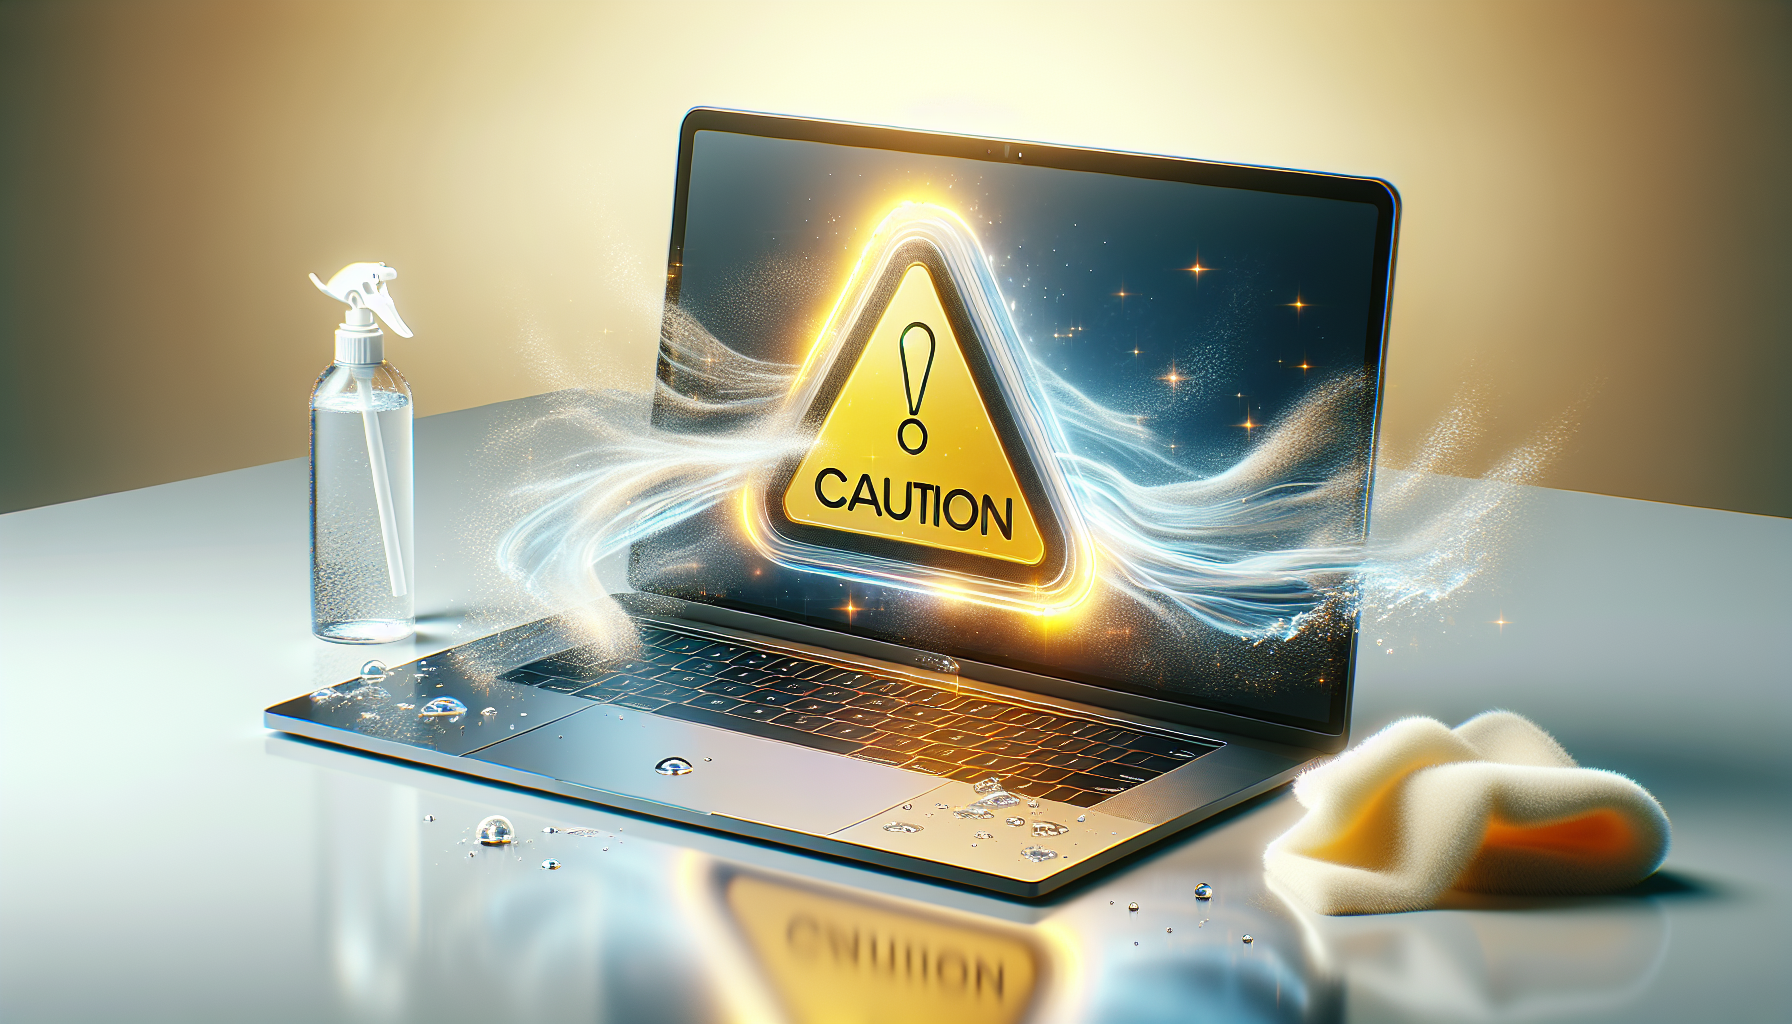 Touchscreen laptop with caution sign